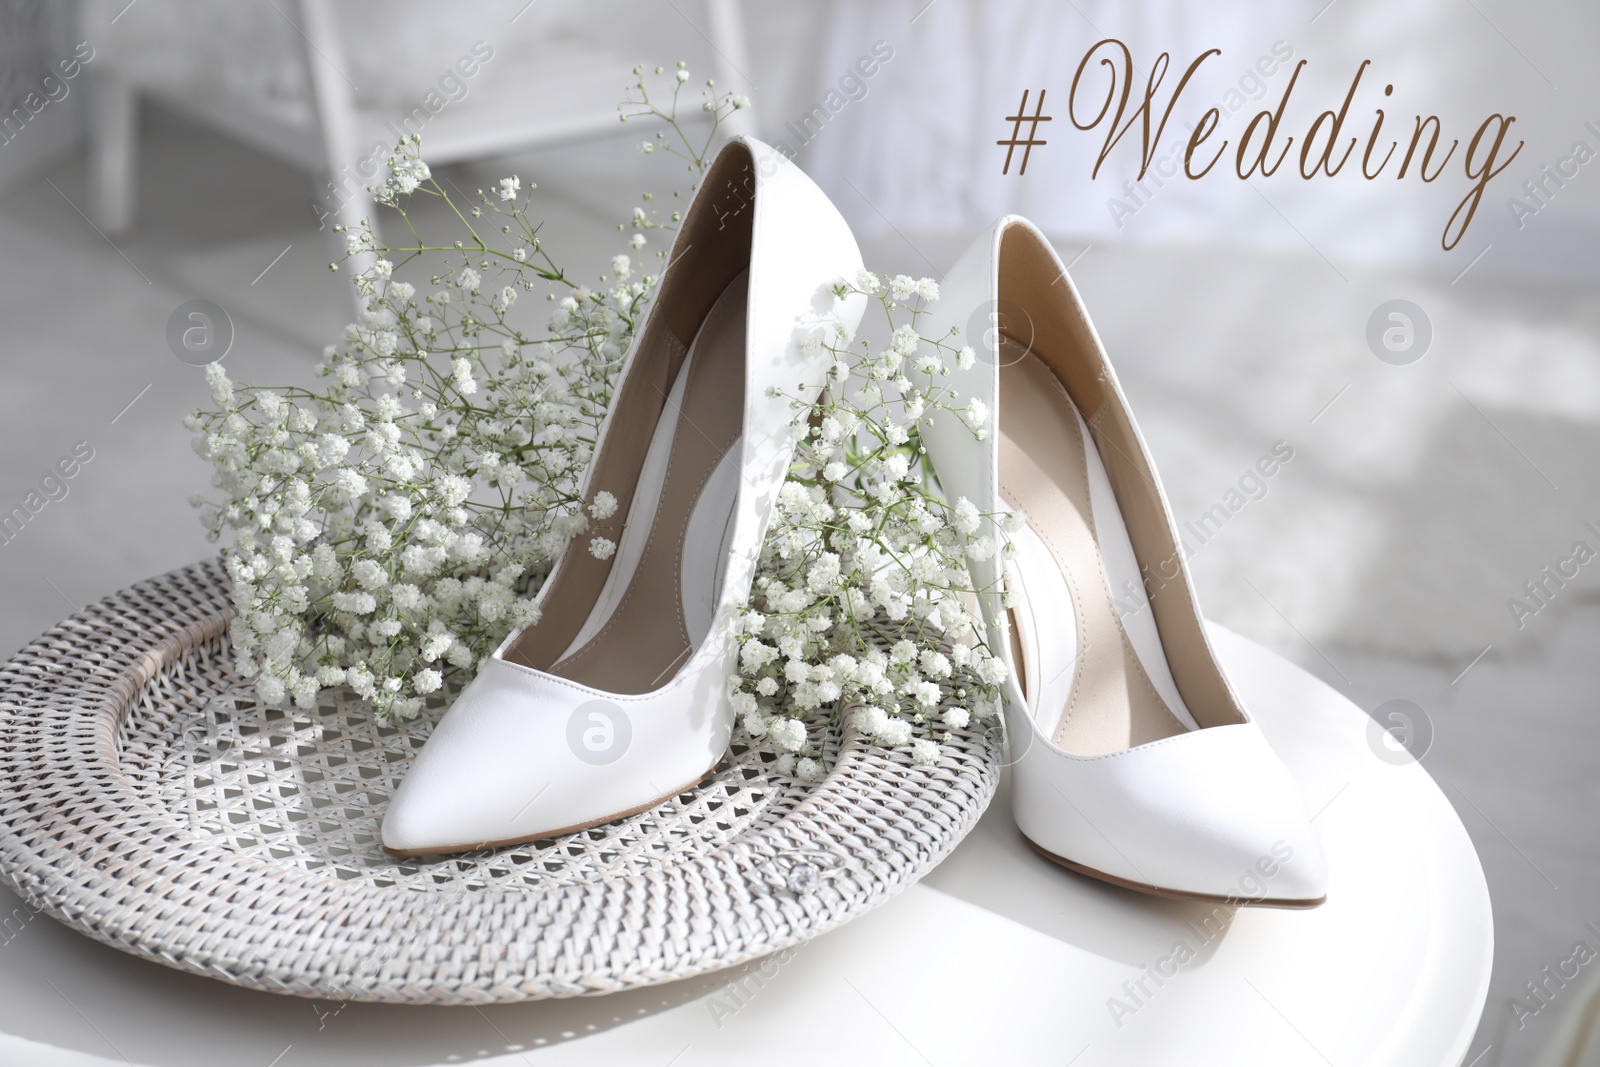 Image of Hashtag Wedding, beautiful shoes, engagement ring and flowers on table indoors